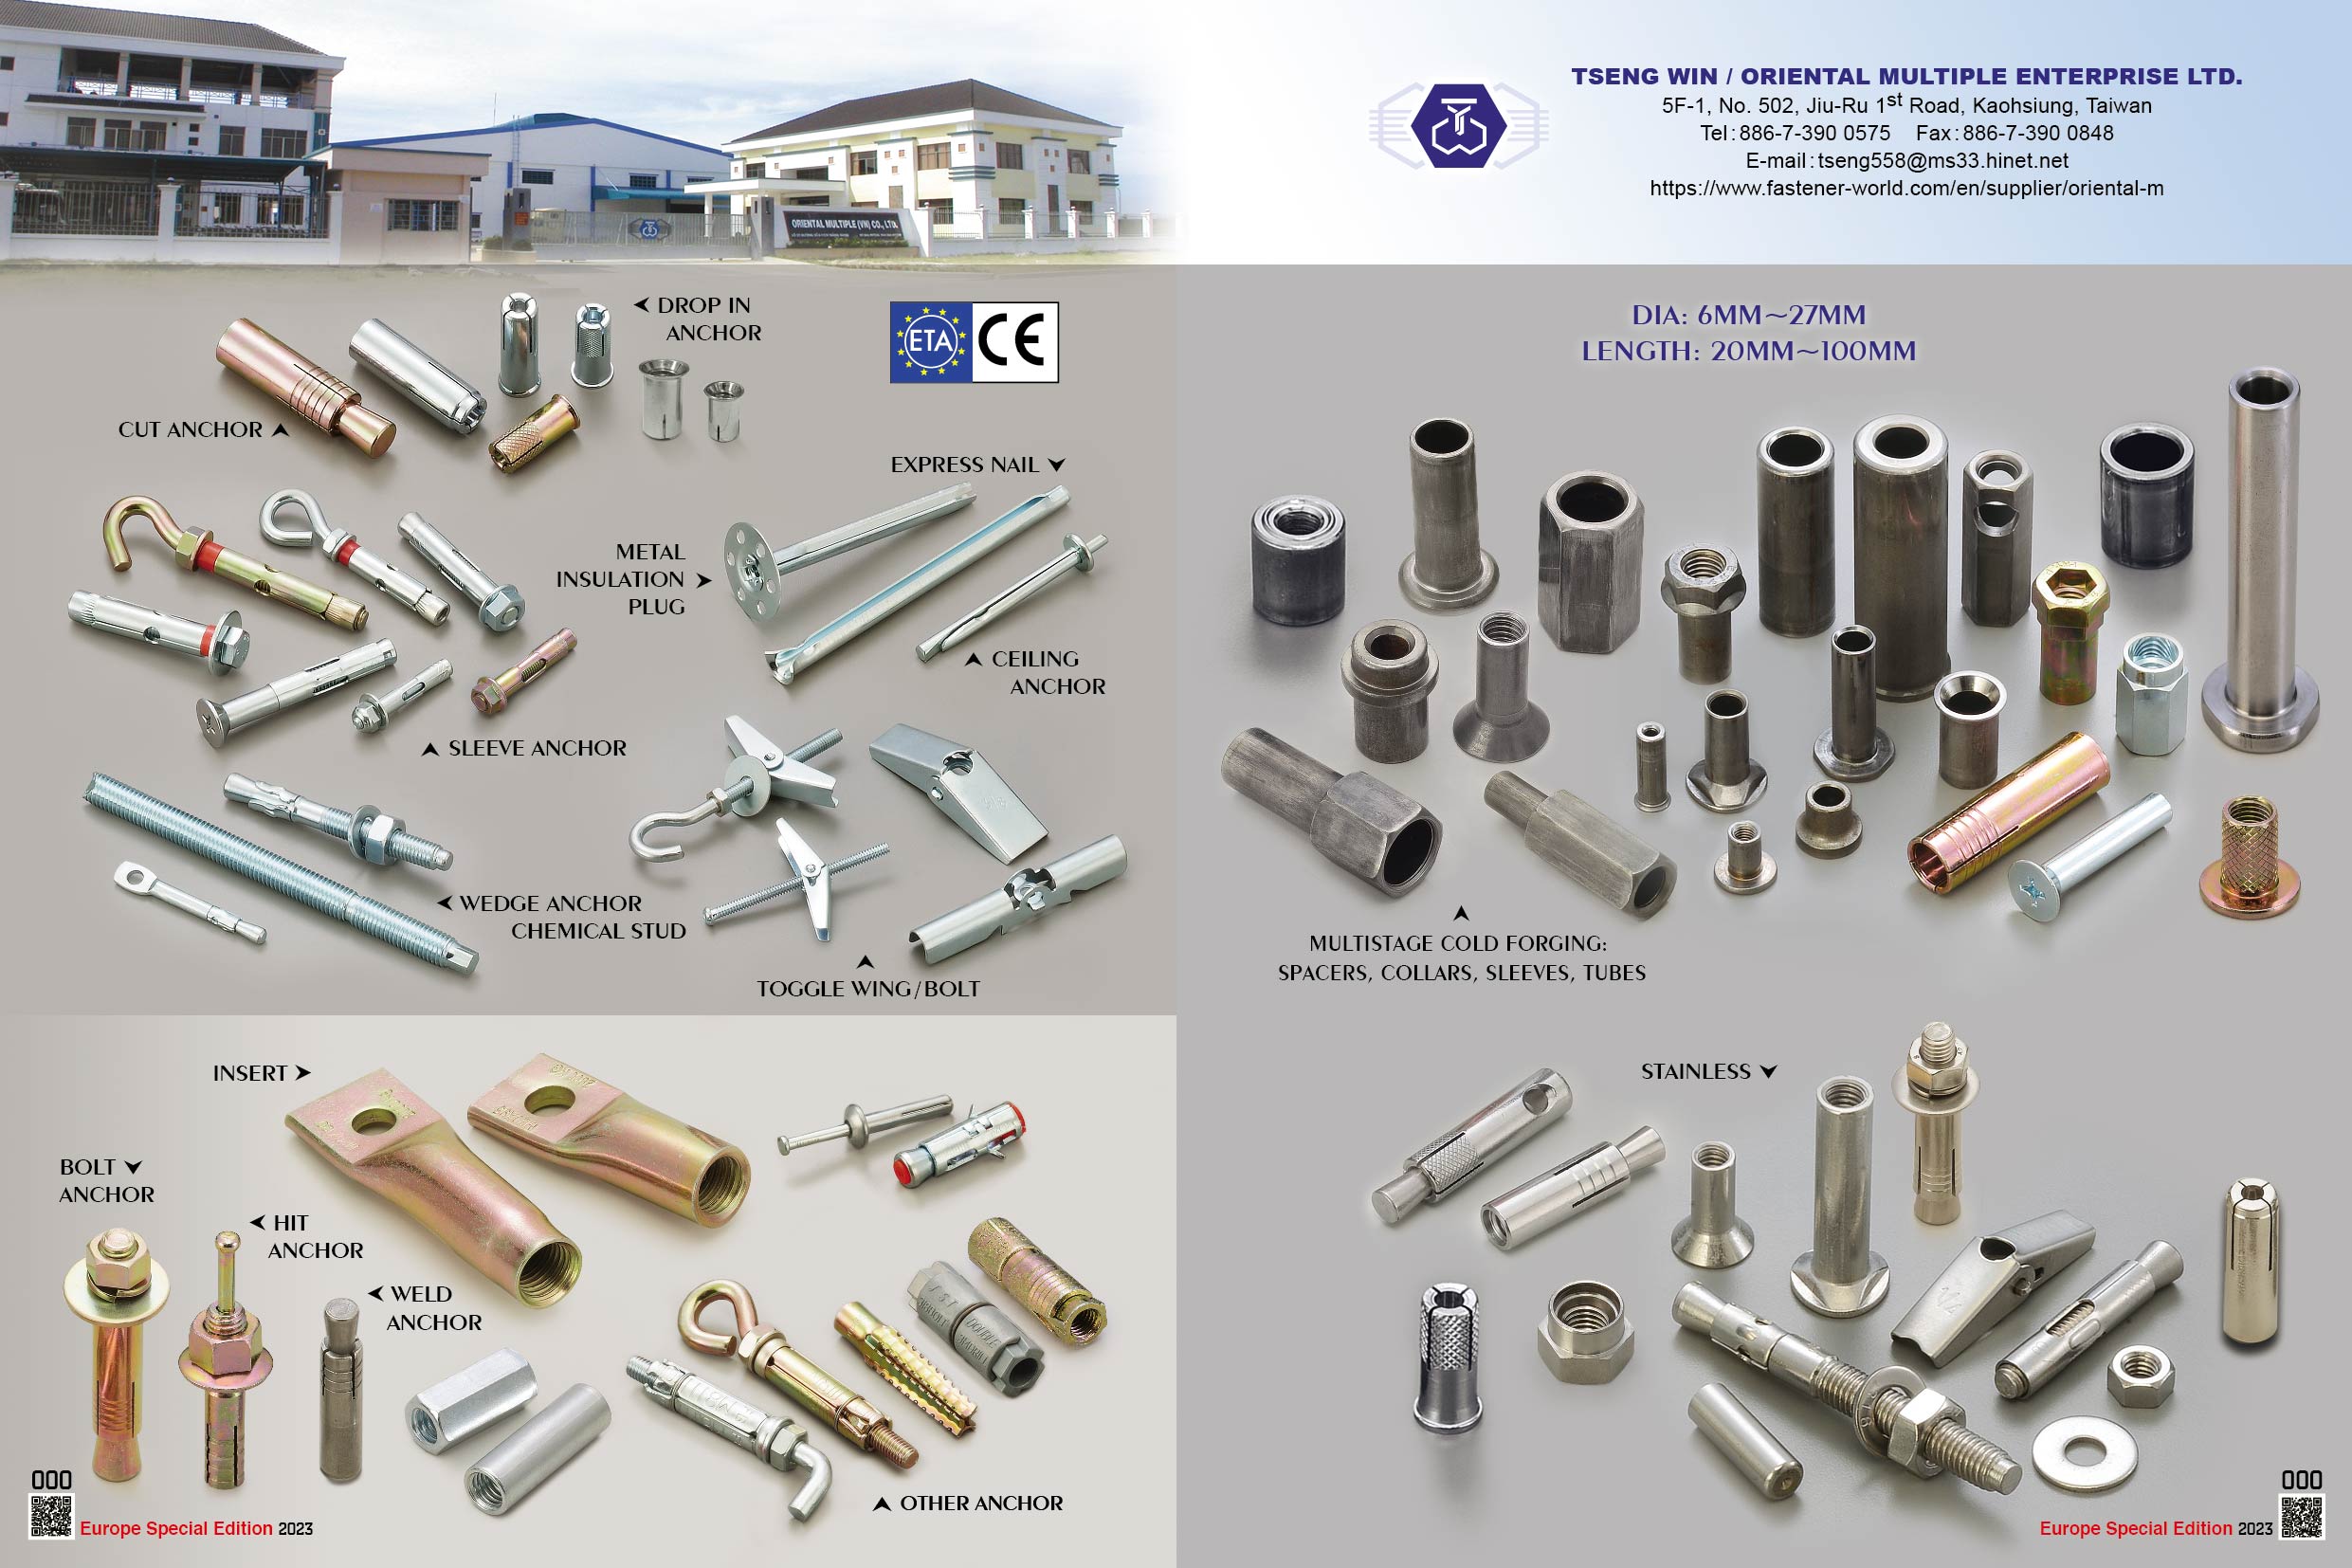 TSENG WIN / ORIENTAL MULTIPLE ENTERPRISE LTD. , Cut Anchor, Drop in Anchor, Metal Insulation Plug, Express Nail, Ceiling Anchor, Sleeve Anchor, Wedge Anchor Chemical Stud, Toggle Wing/Bolt, Insert, Bolt Anchor, Hit Anchor, Weld Anchor, Stainless Steel, Multistage cold Forging, Spacers, Collars, Sleeves, Tubes , Cut Anchors